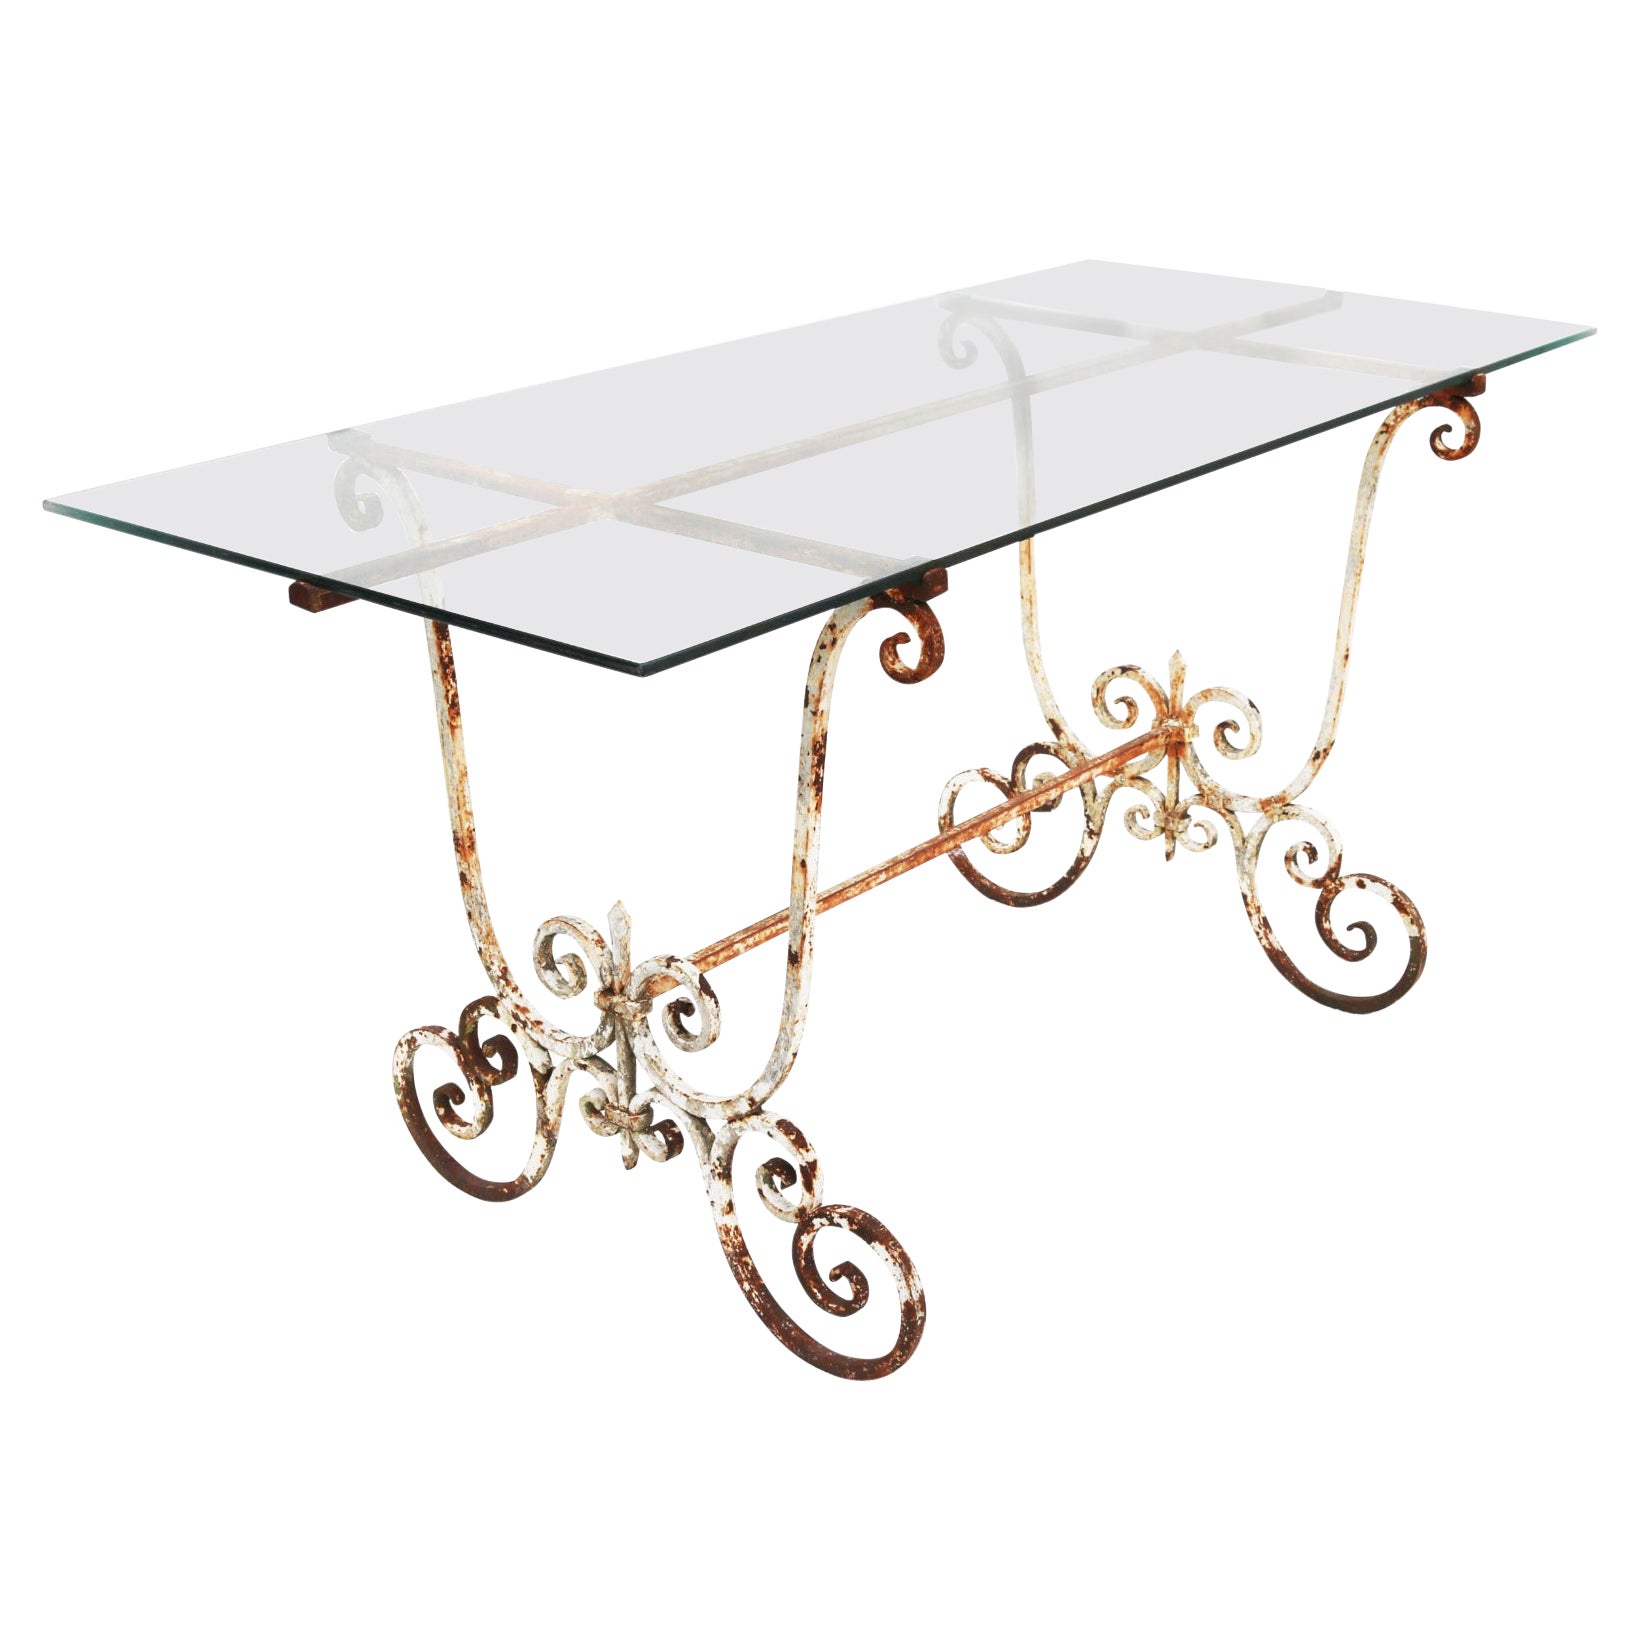 Reclaimed Glass and Wrought Iron Garden Table For Sale